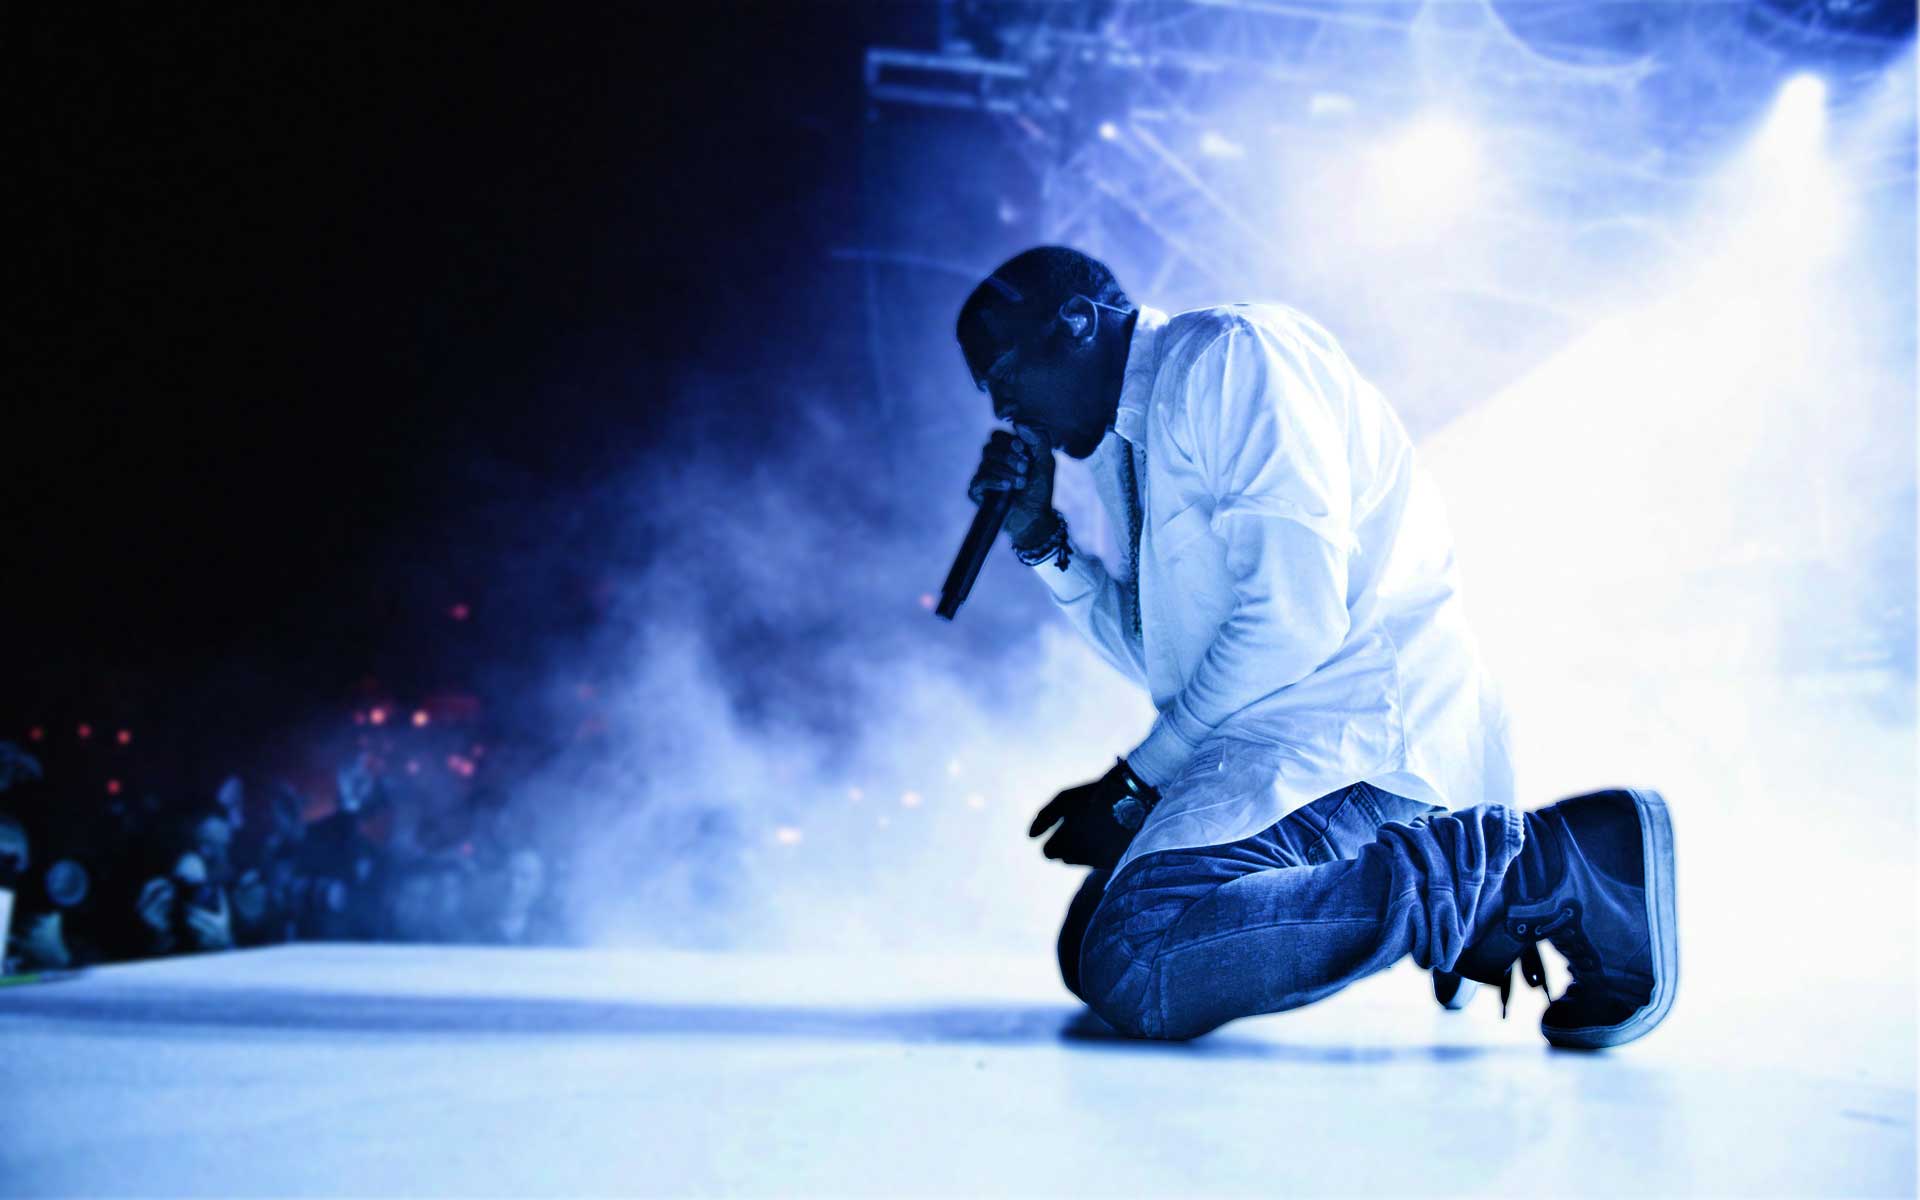 Kanye West Desktop Wallpapers - HD Wallpapers Backgrounds of Your ...